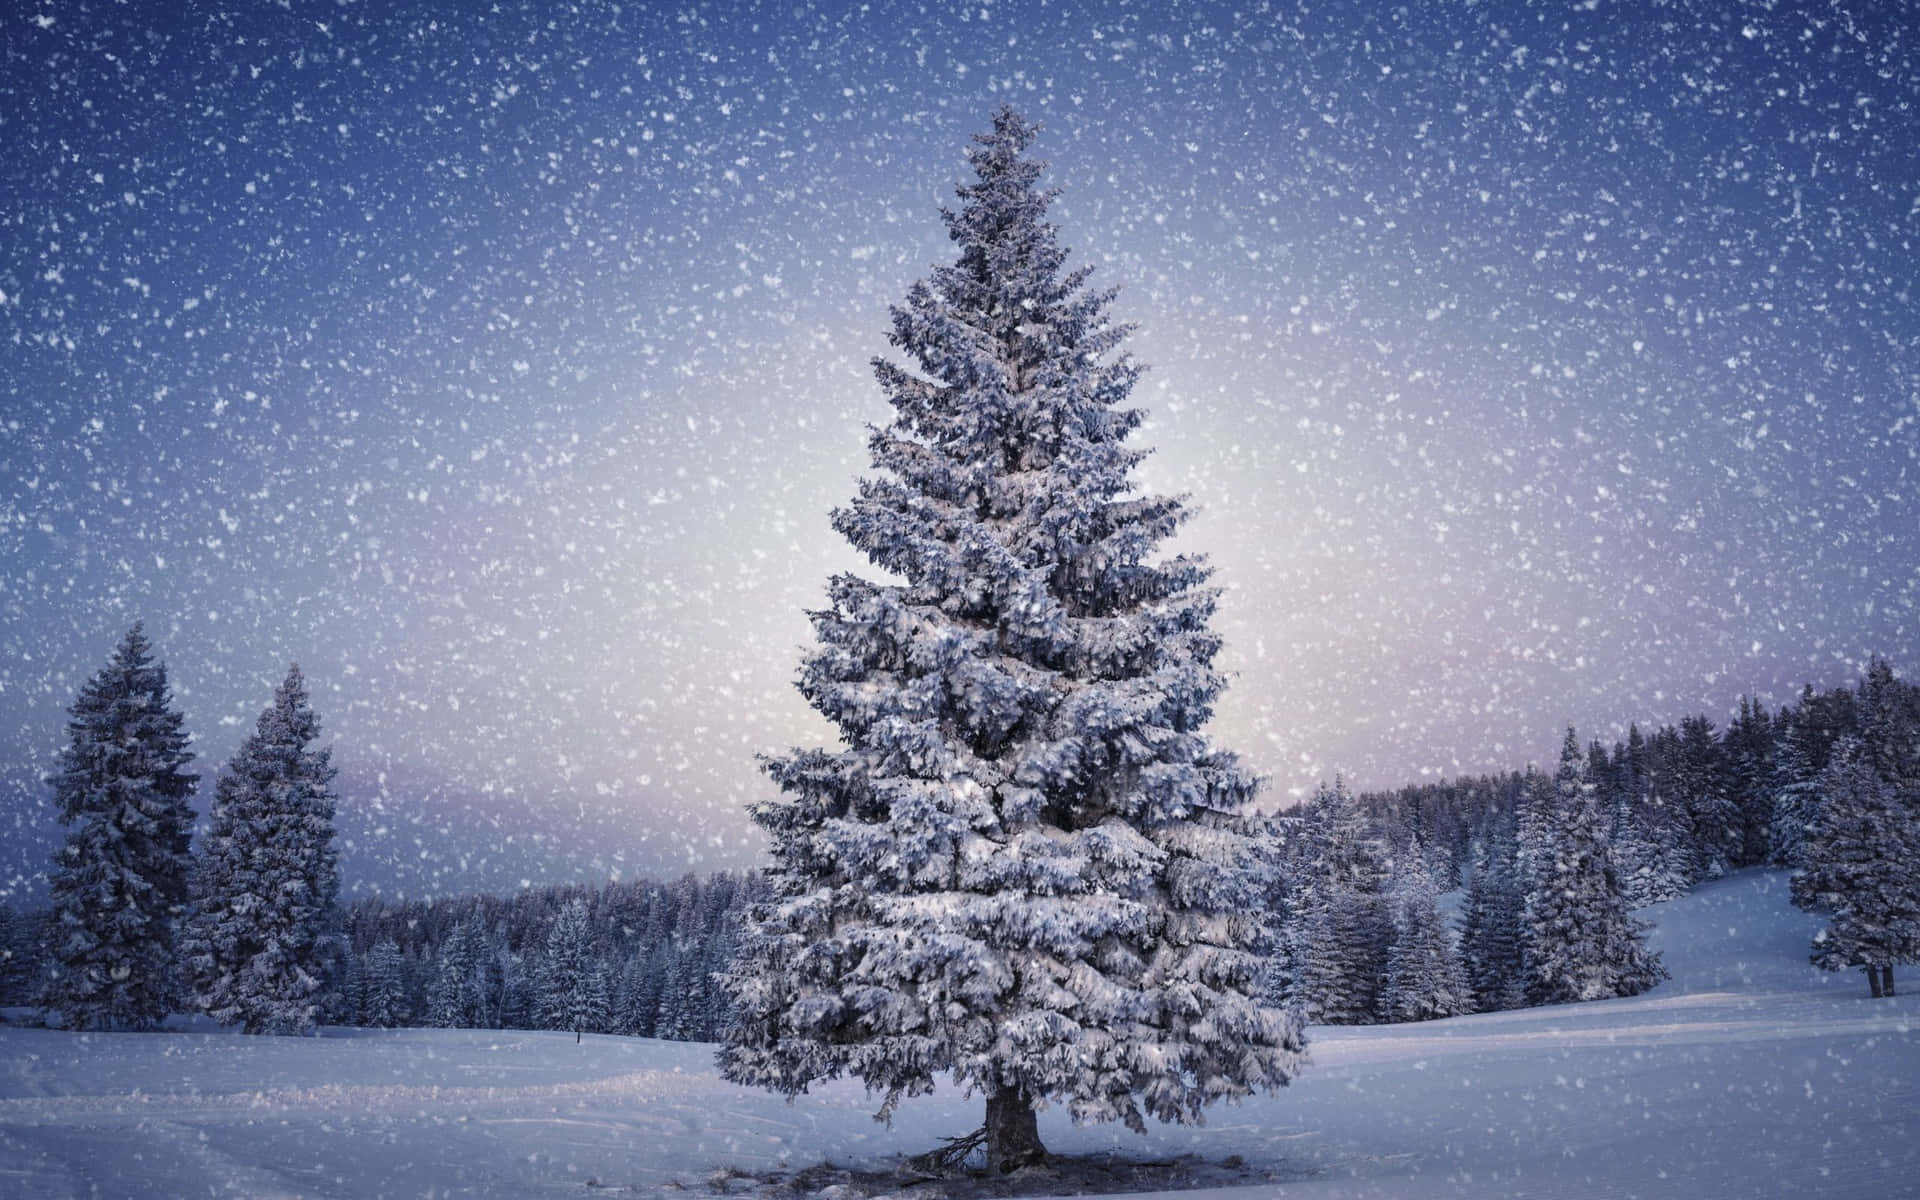 Enchanting Snow-Covered Trees in a Winter Wonderland Wallpaper